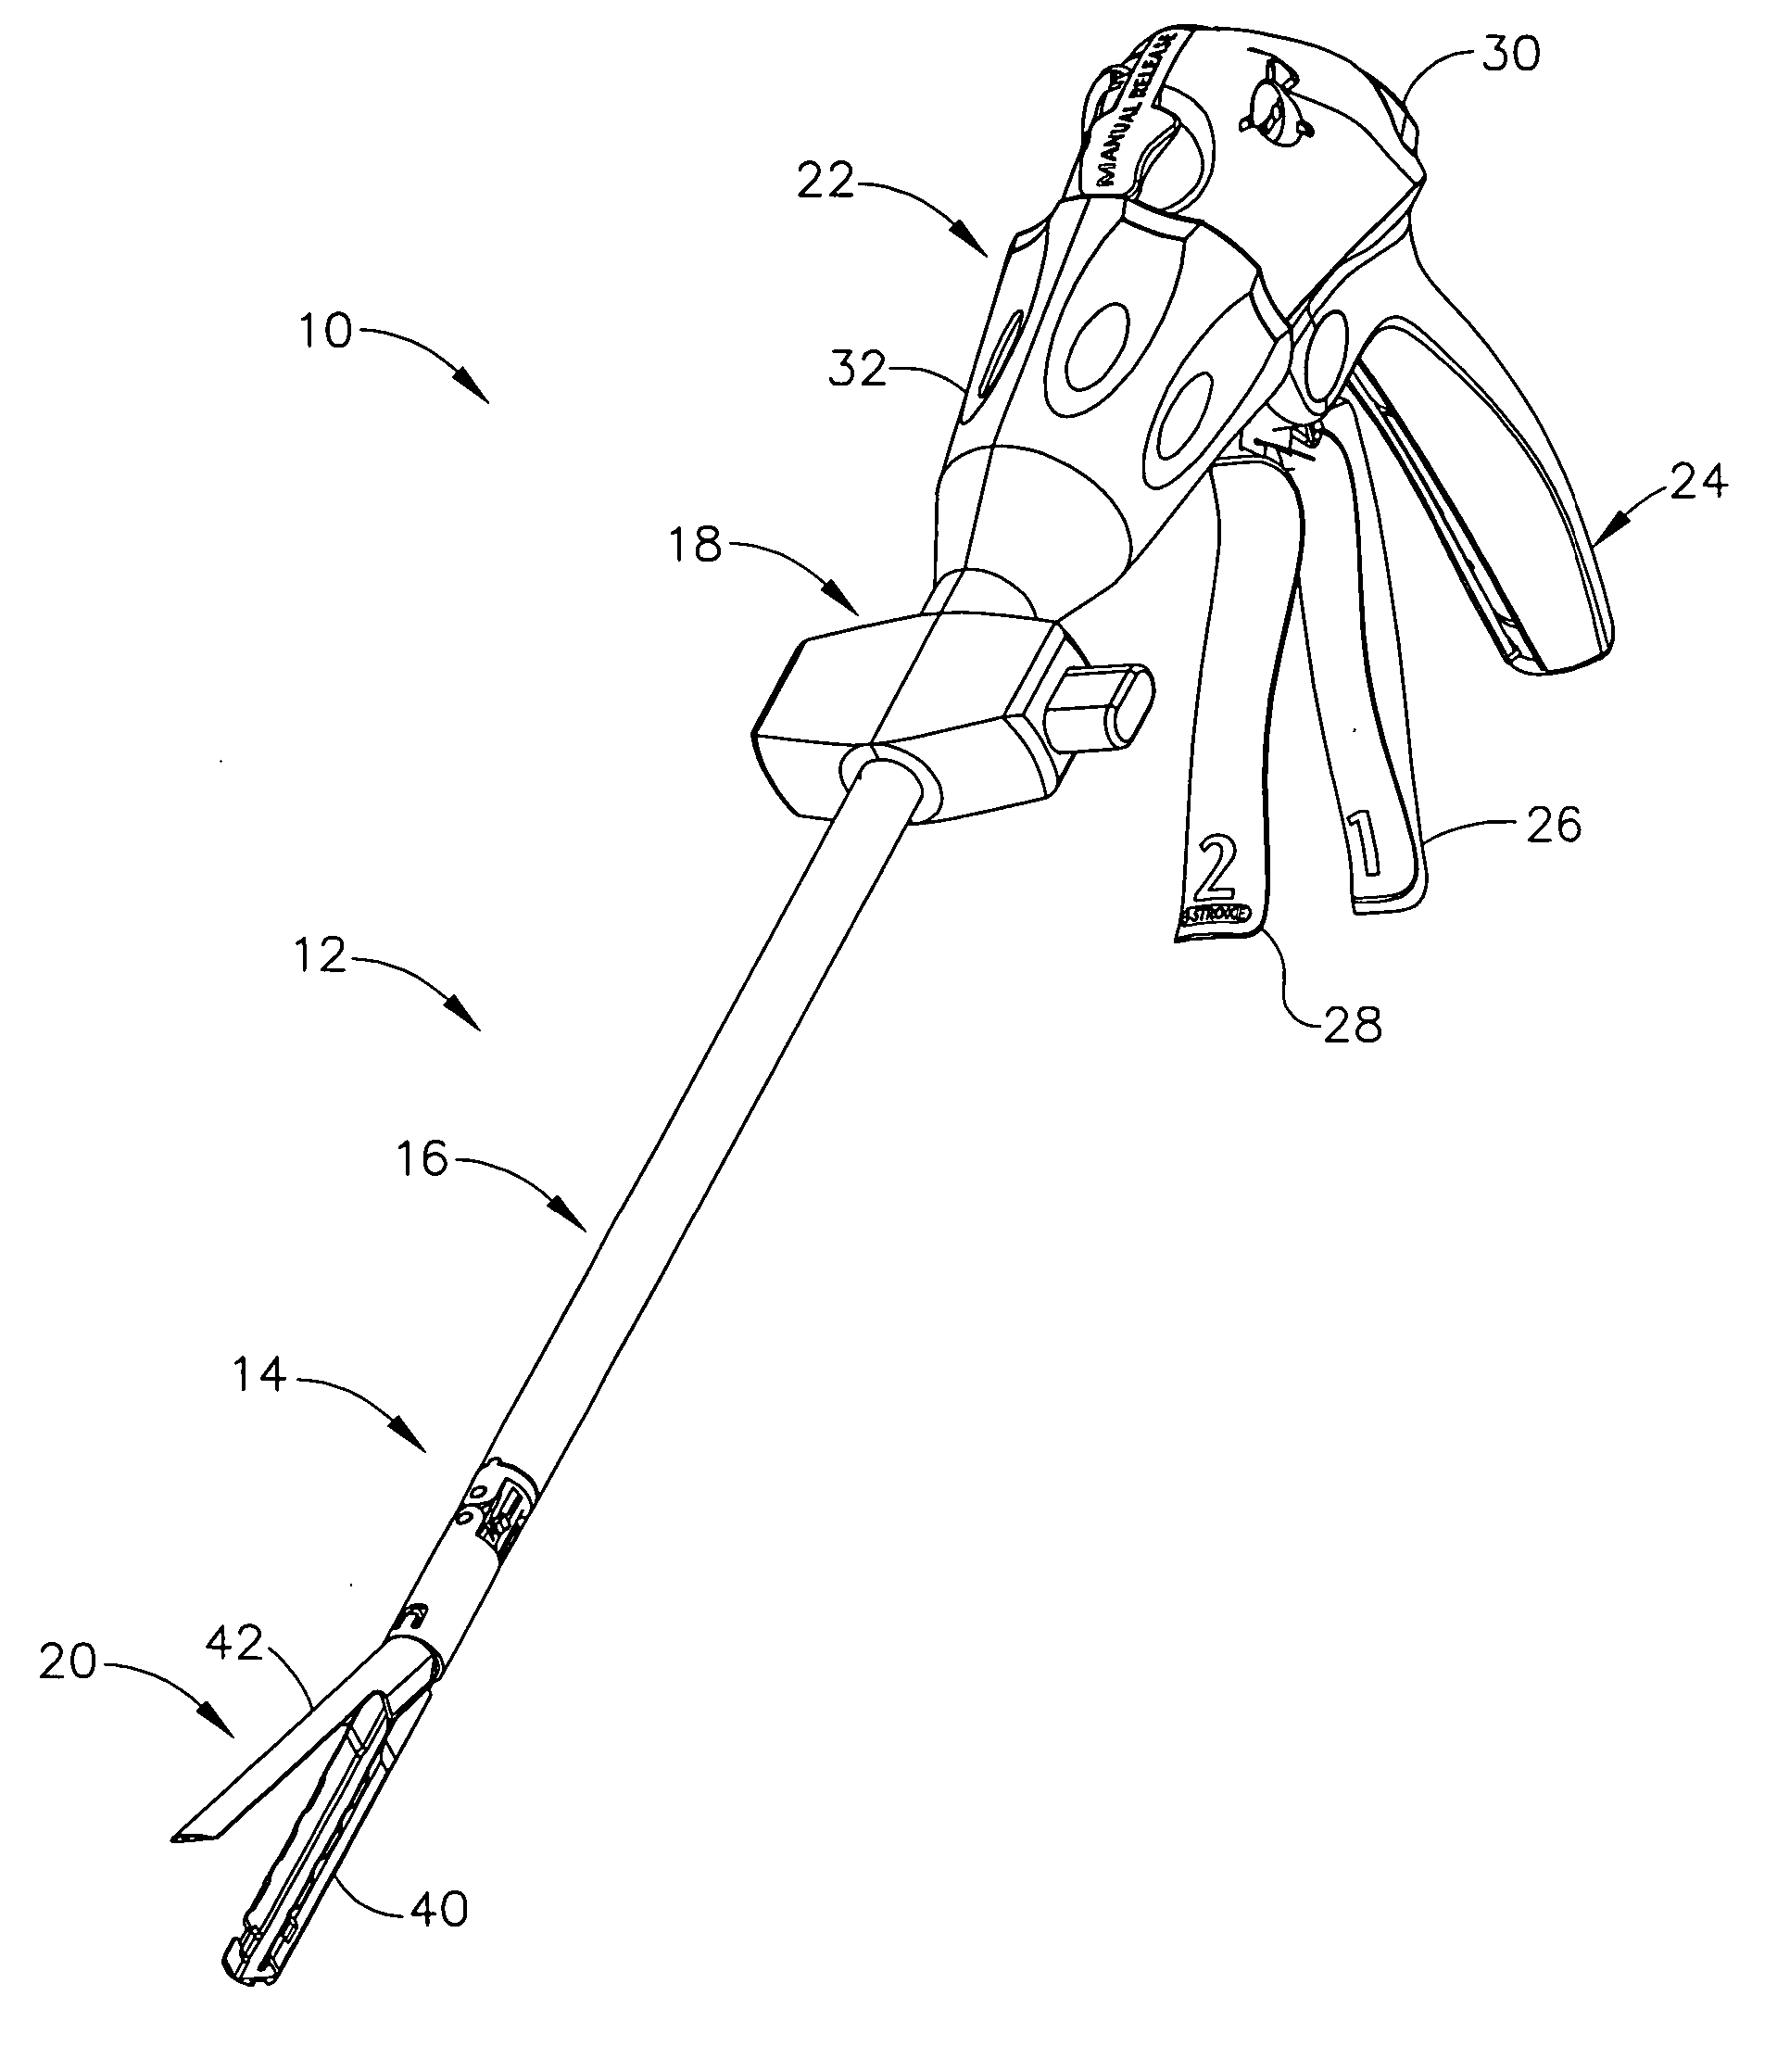 Surgical instrument incorporating a fluid transfer controlled articulation mechanism